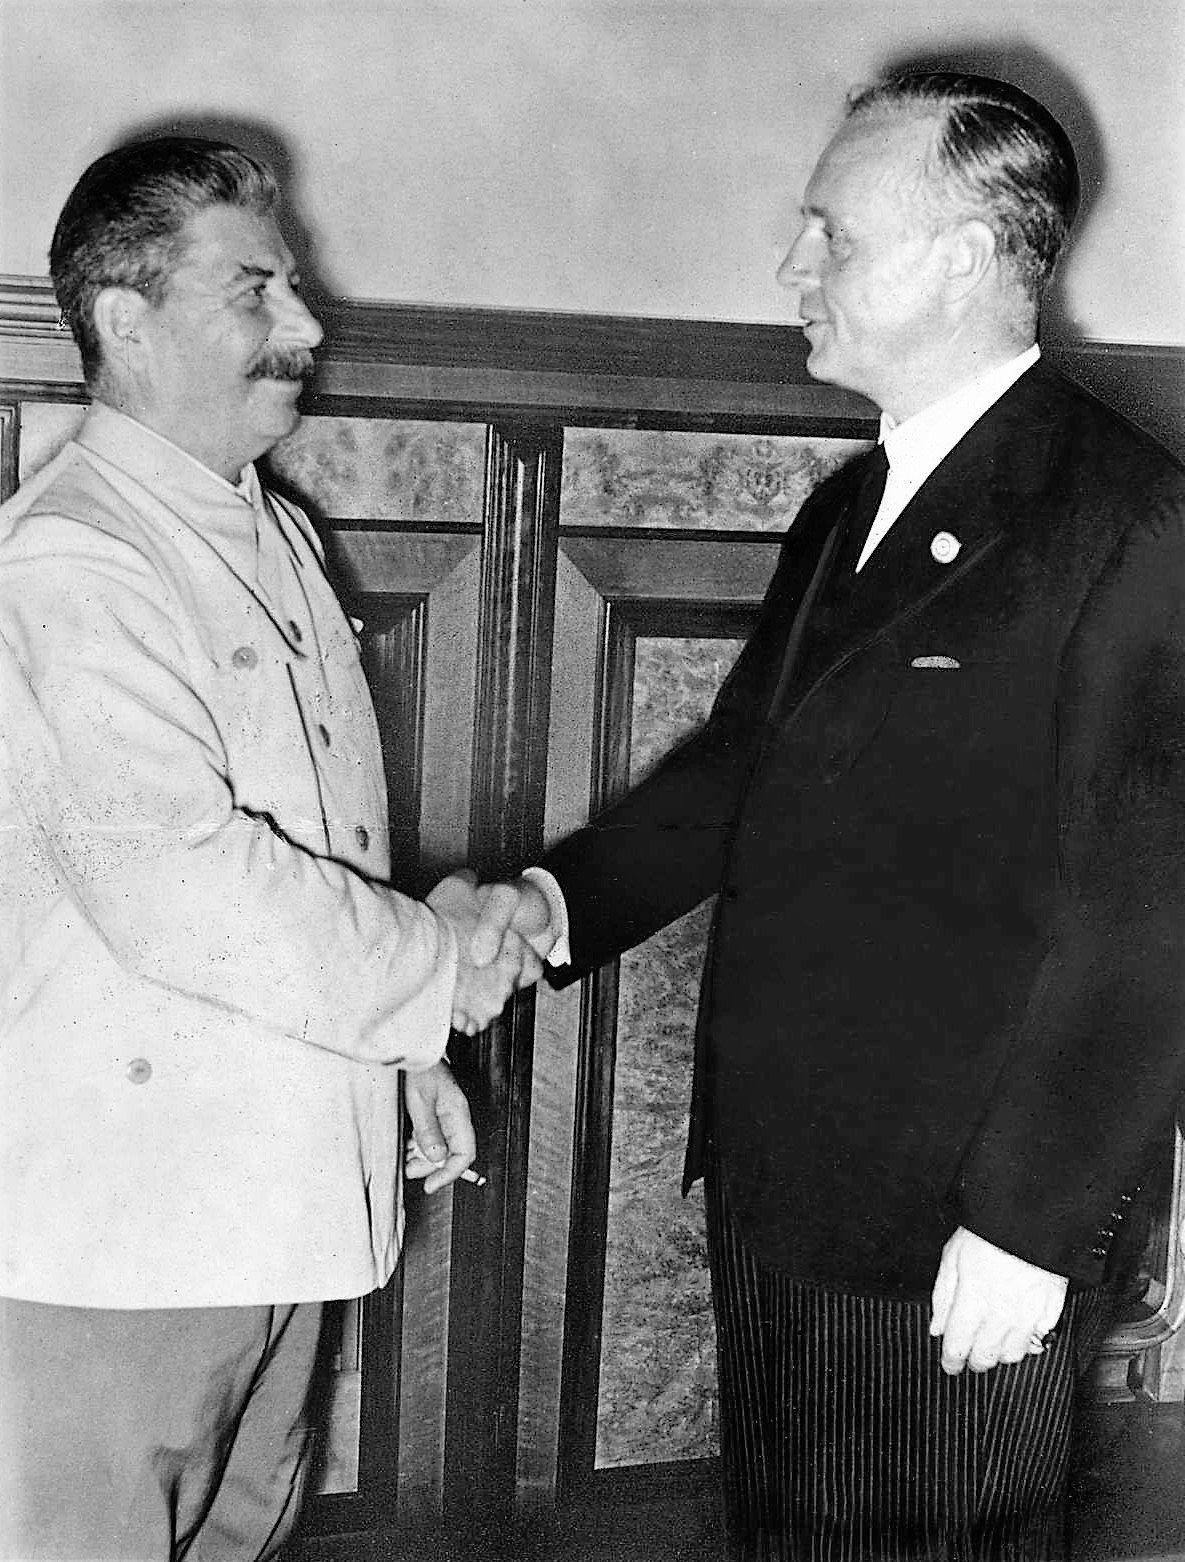 Stalin and Ribbentrop shaking hands after the signing of the pact in the Kremlin, August 1939.